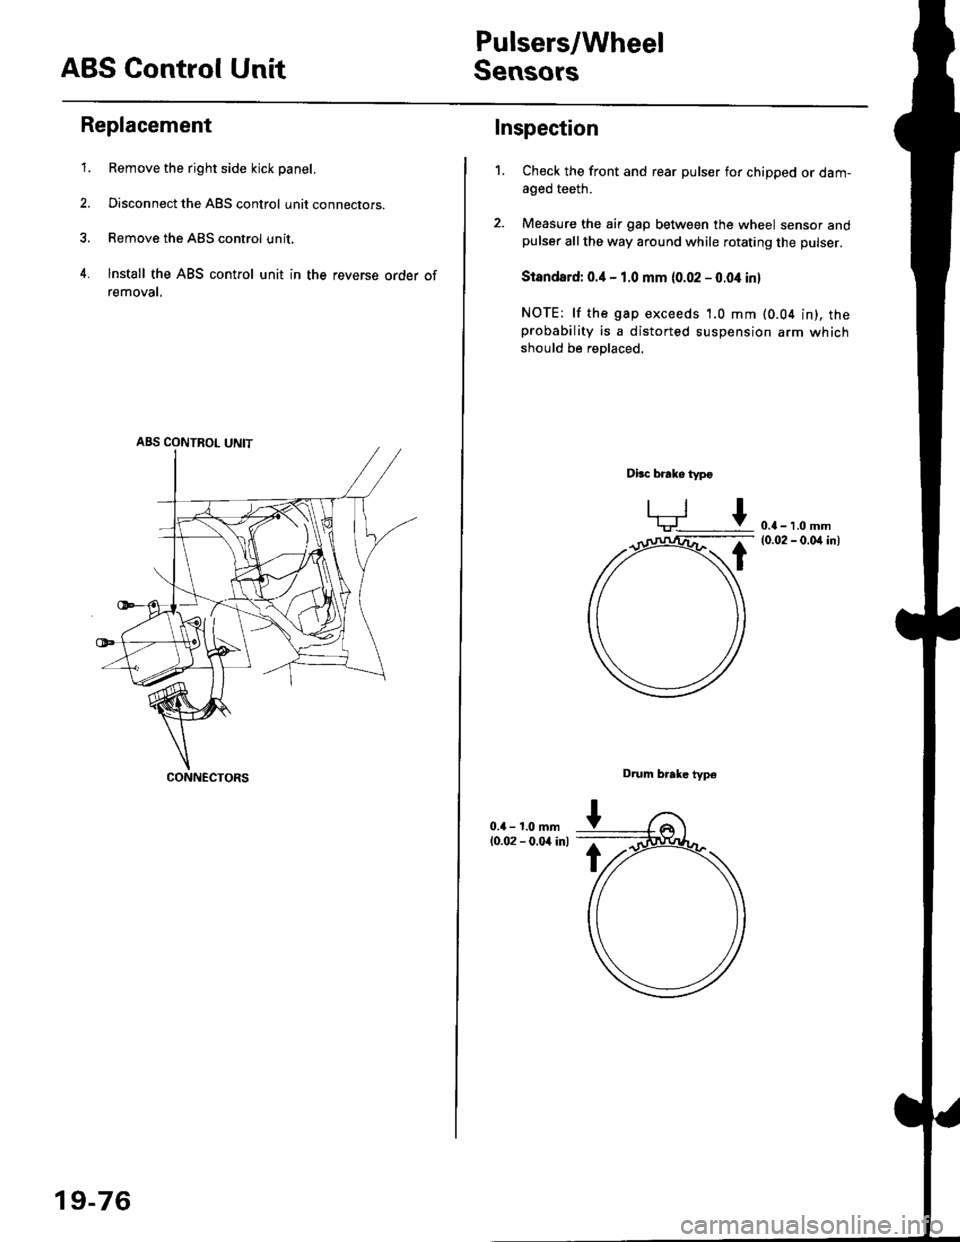 HONDA CIVIC 1996 6.G Workshop Manual ABS Control Unit
Pulsers/Wheel
Sensors
Replacement
1. Remove the right side kick panel.
2. Disconnect the ABS control unit connecrors.
3. Remove the ABS control unit,
4. lnstall the ABS control unit i